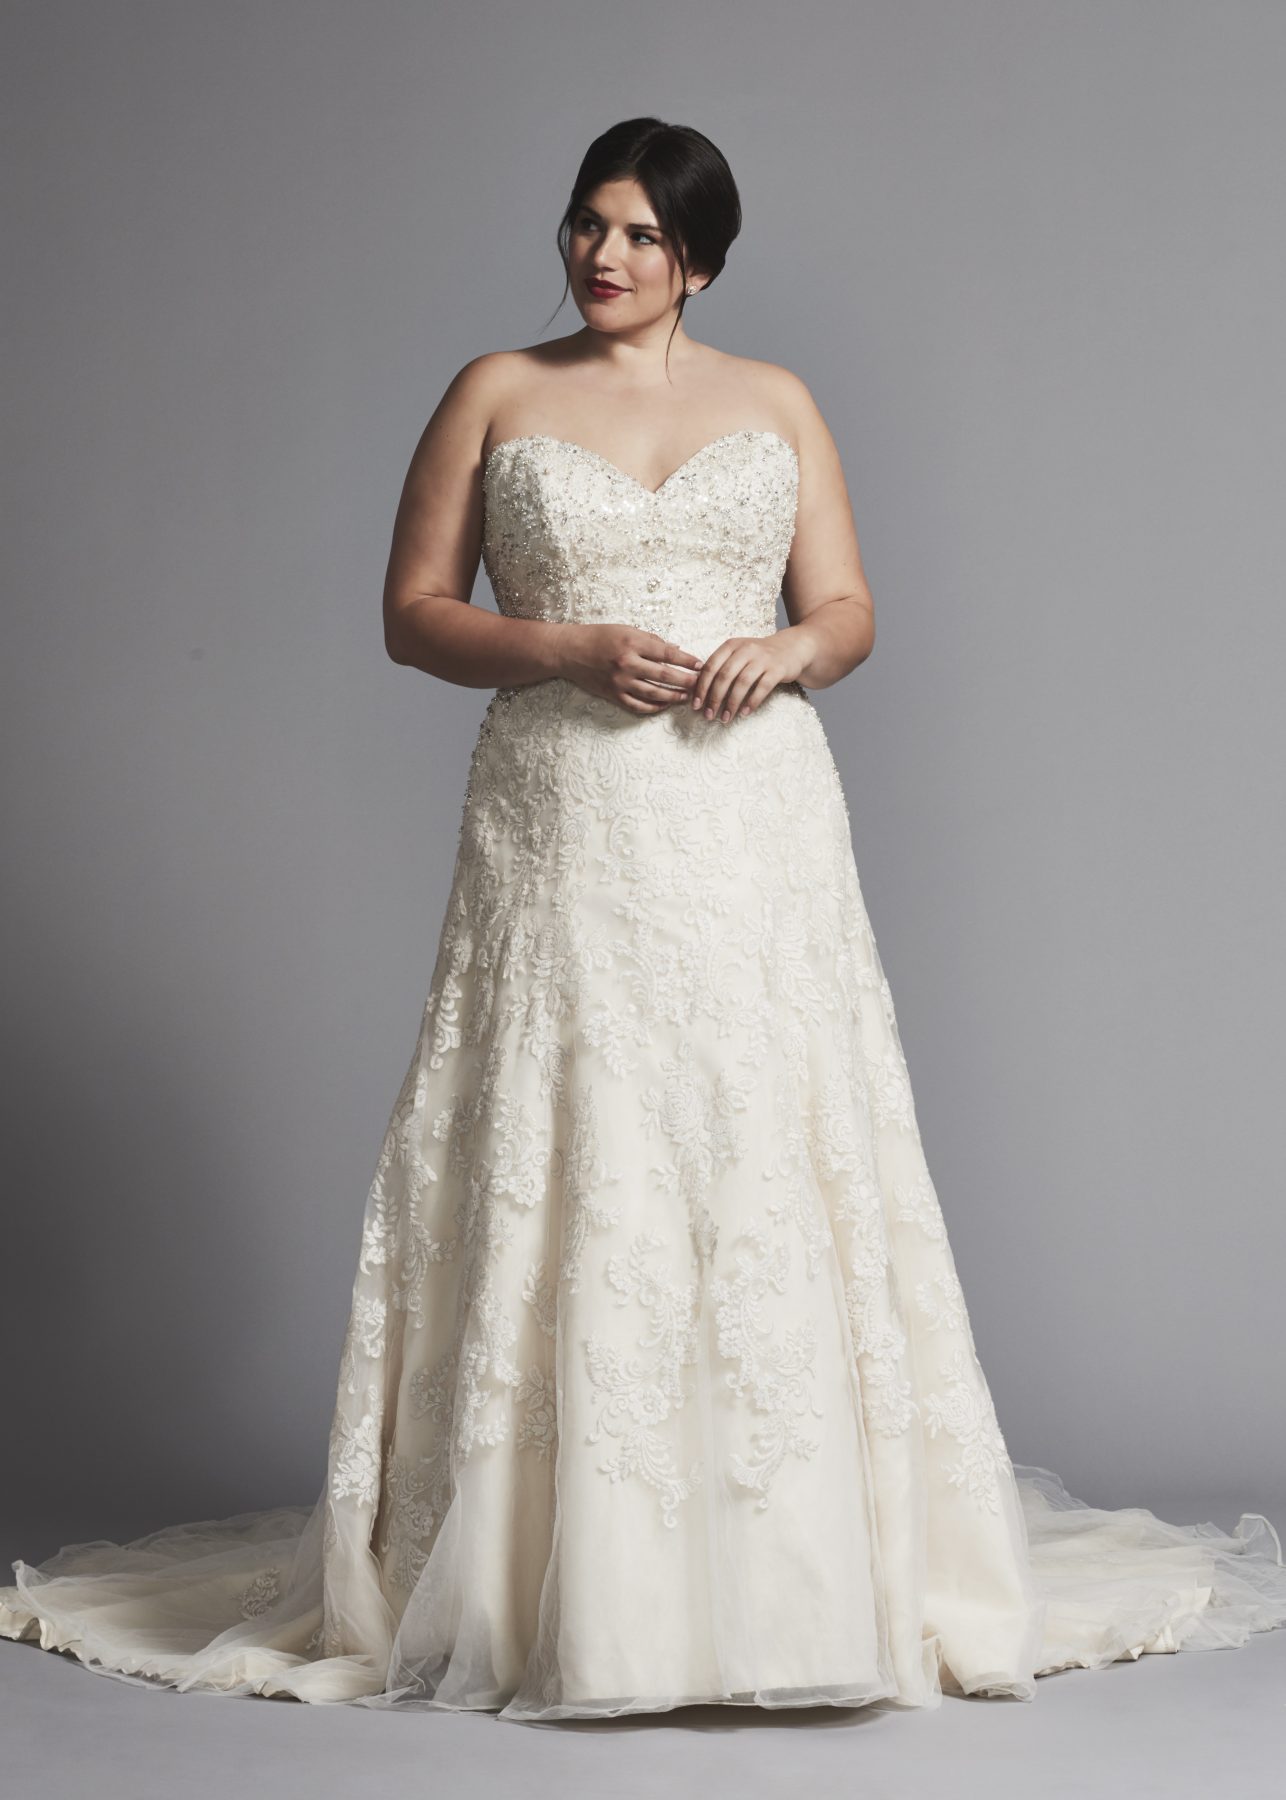 22 Designer Plus-Size Wedding Dresses That Prove Your Body is Perfect ...